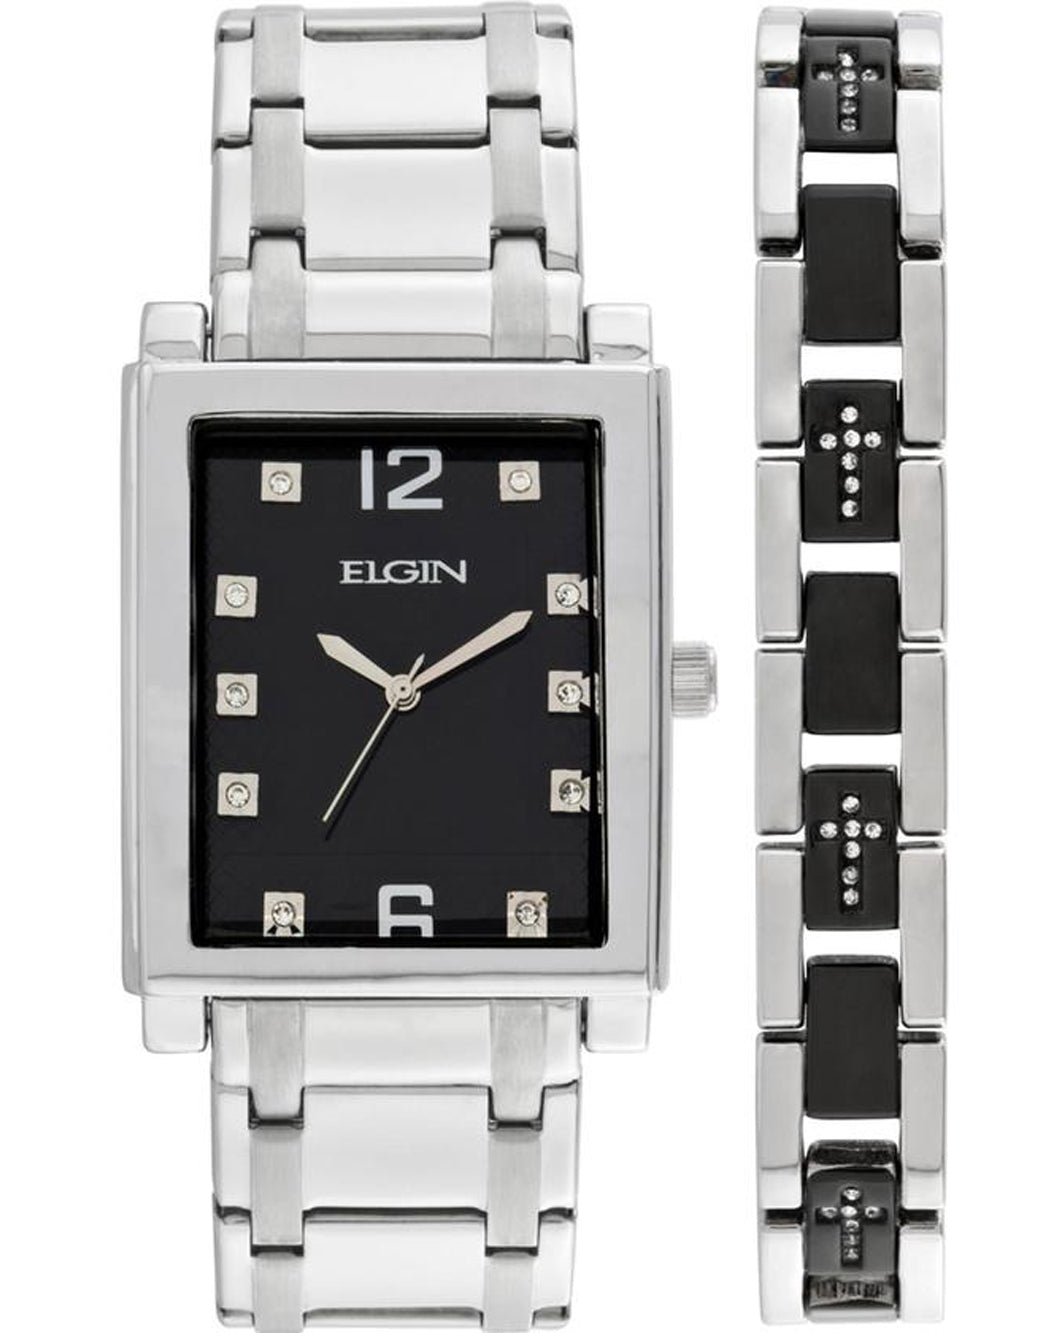 Model: Elgin Men's   Watch in Crystal Accent Silver Tone and Black with Cross Bracelet Set